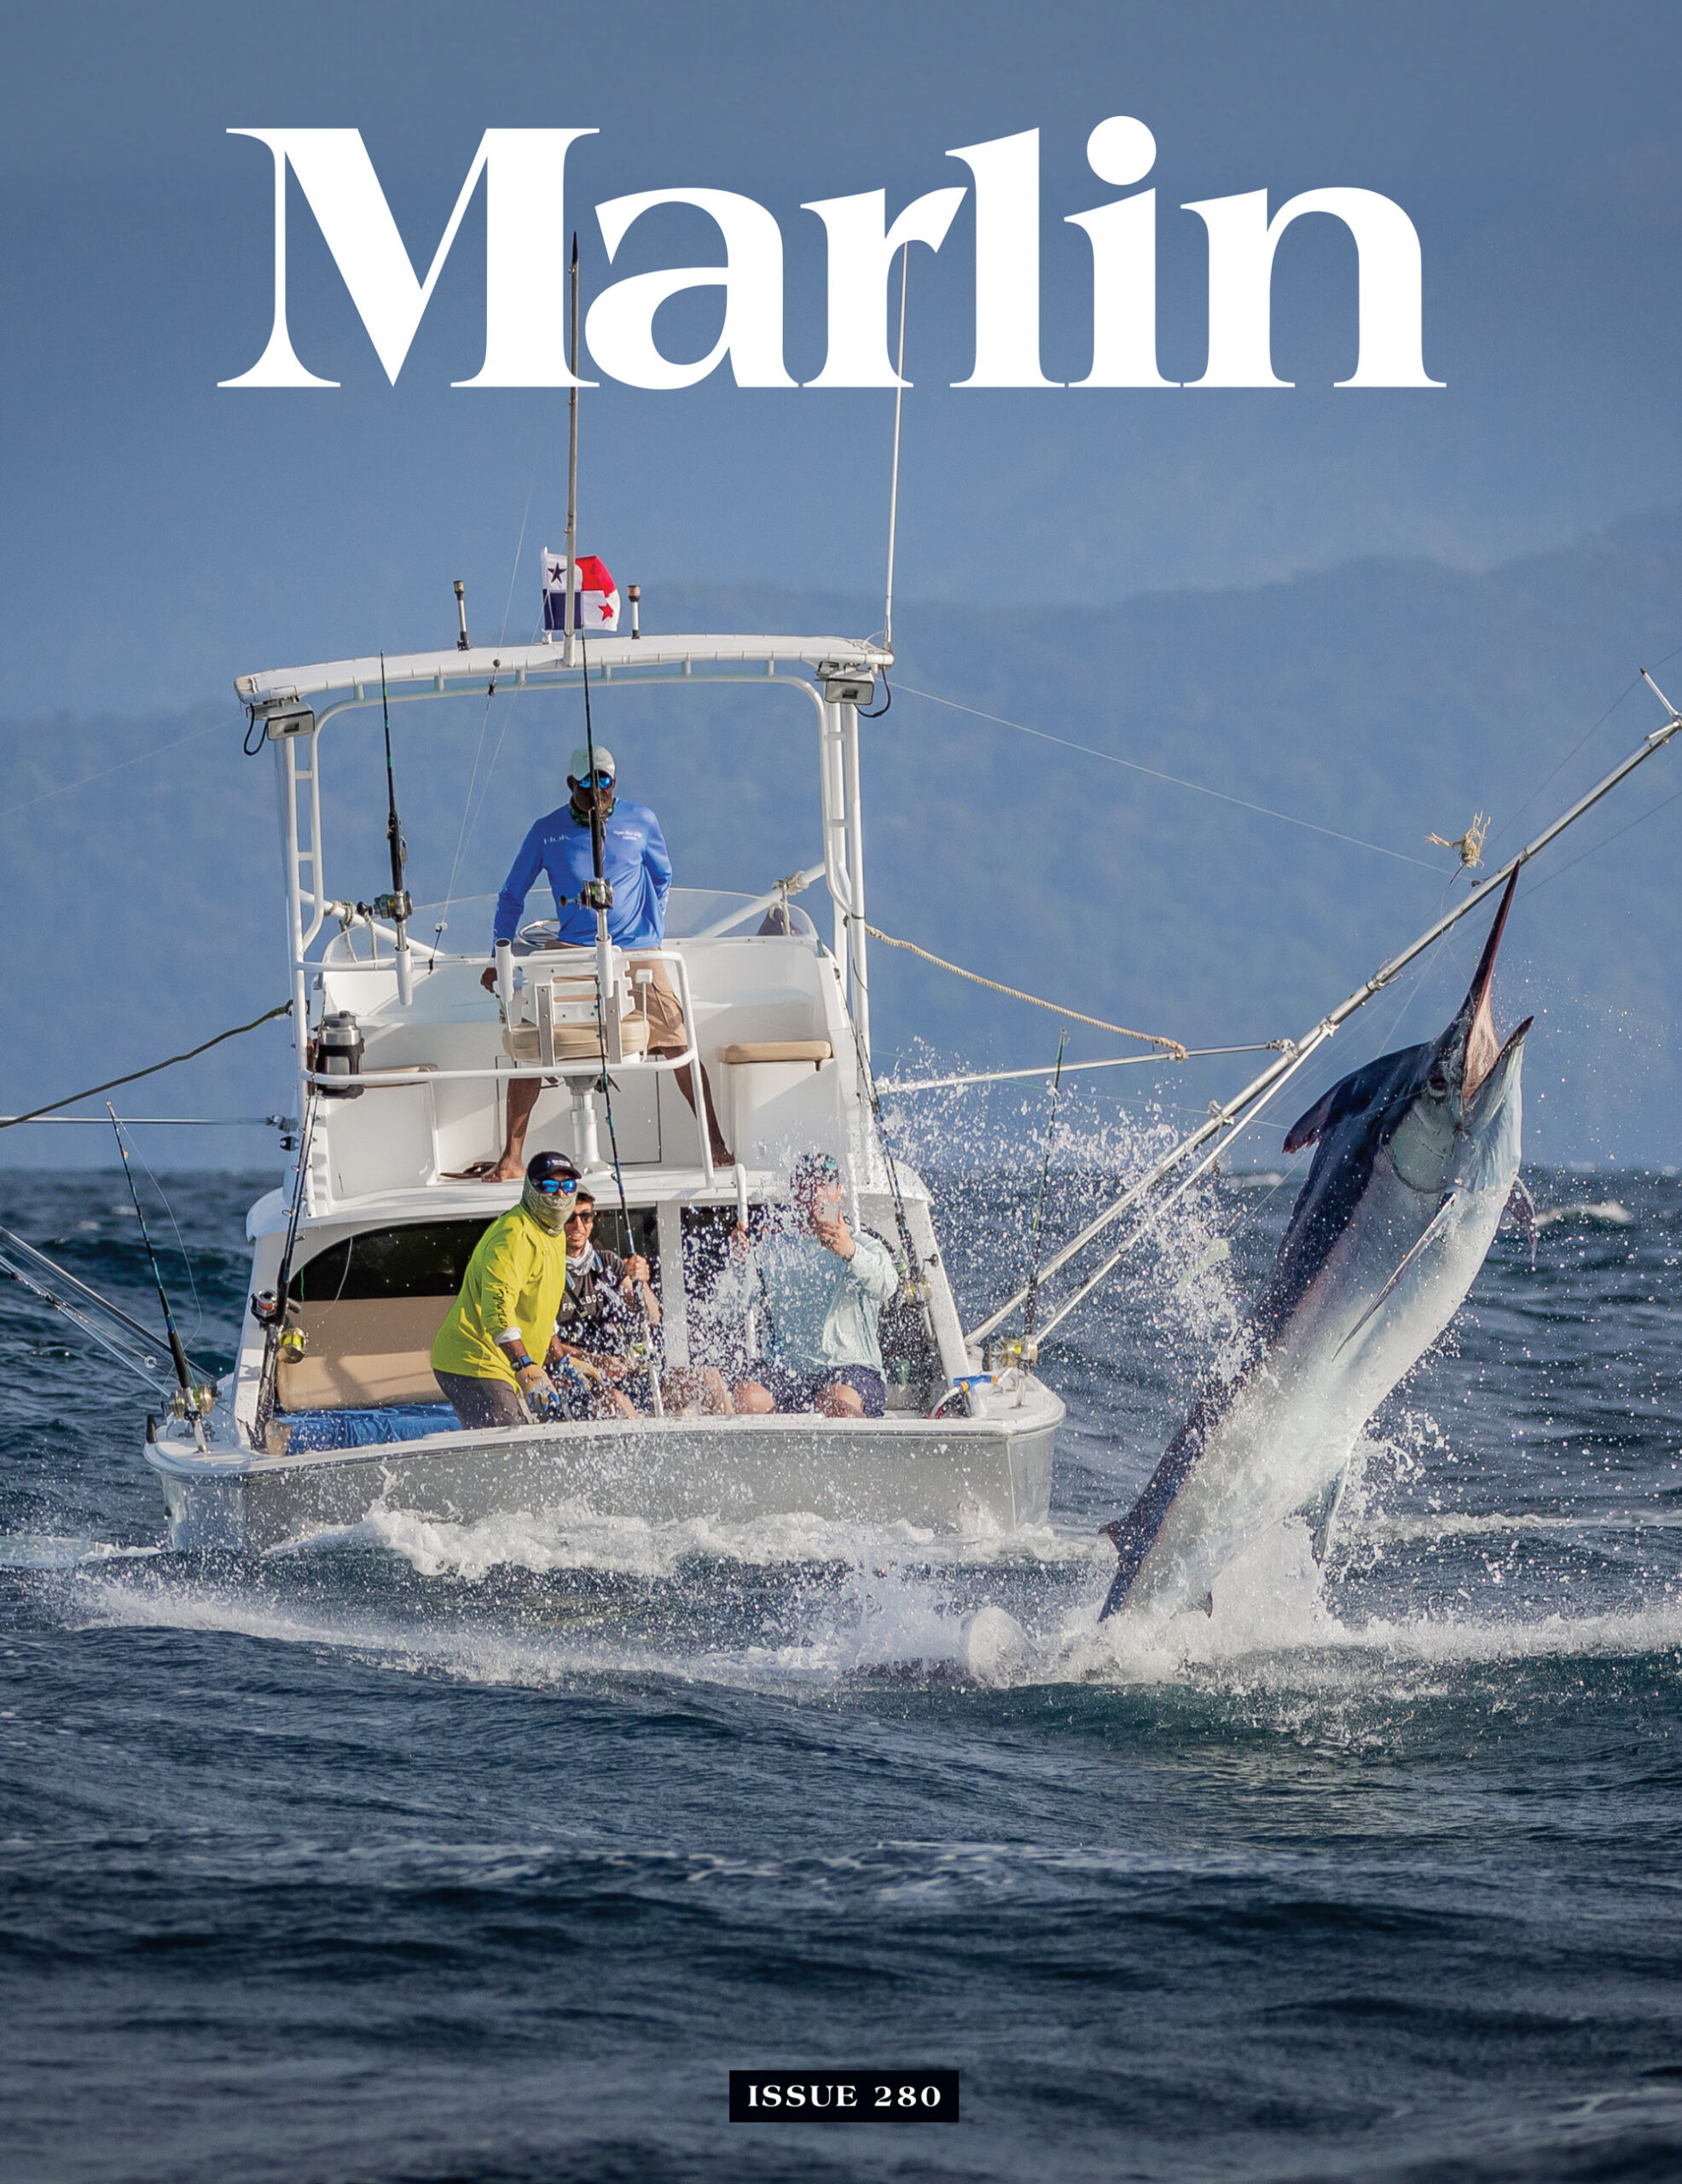 Cover of issue 280 of Marlin Magazine. Features a crew of sport-fishers reeling in a large marlin boatside.